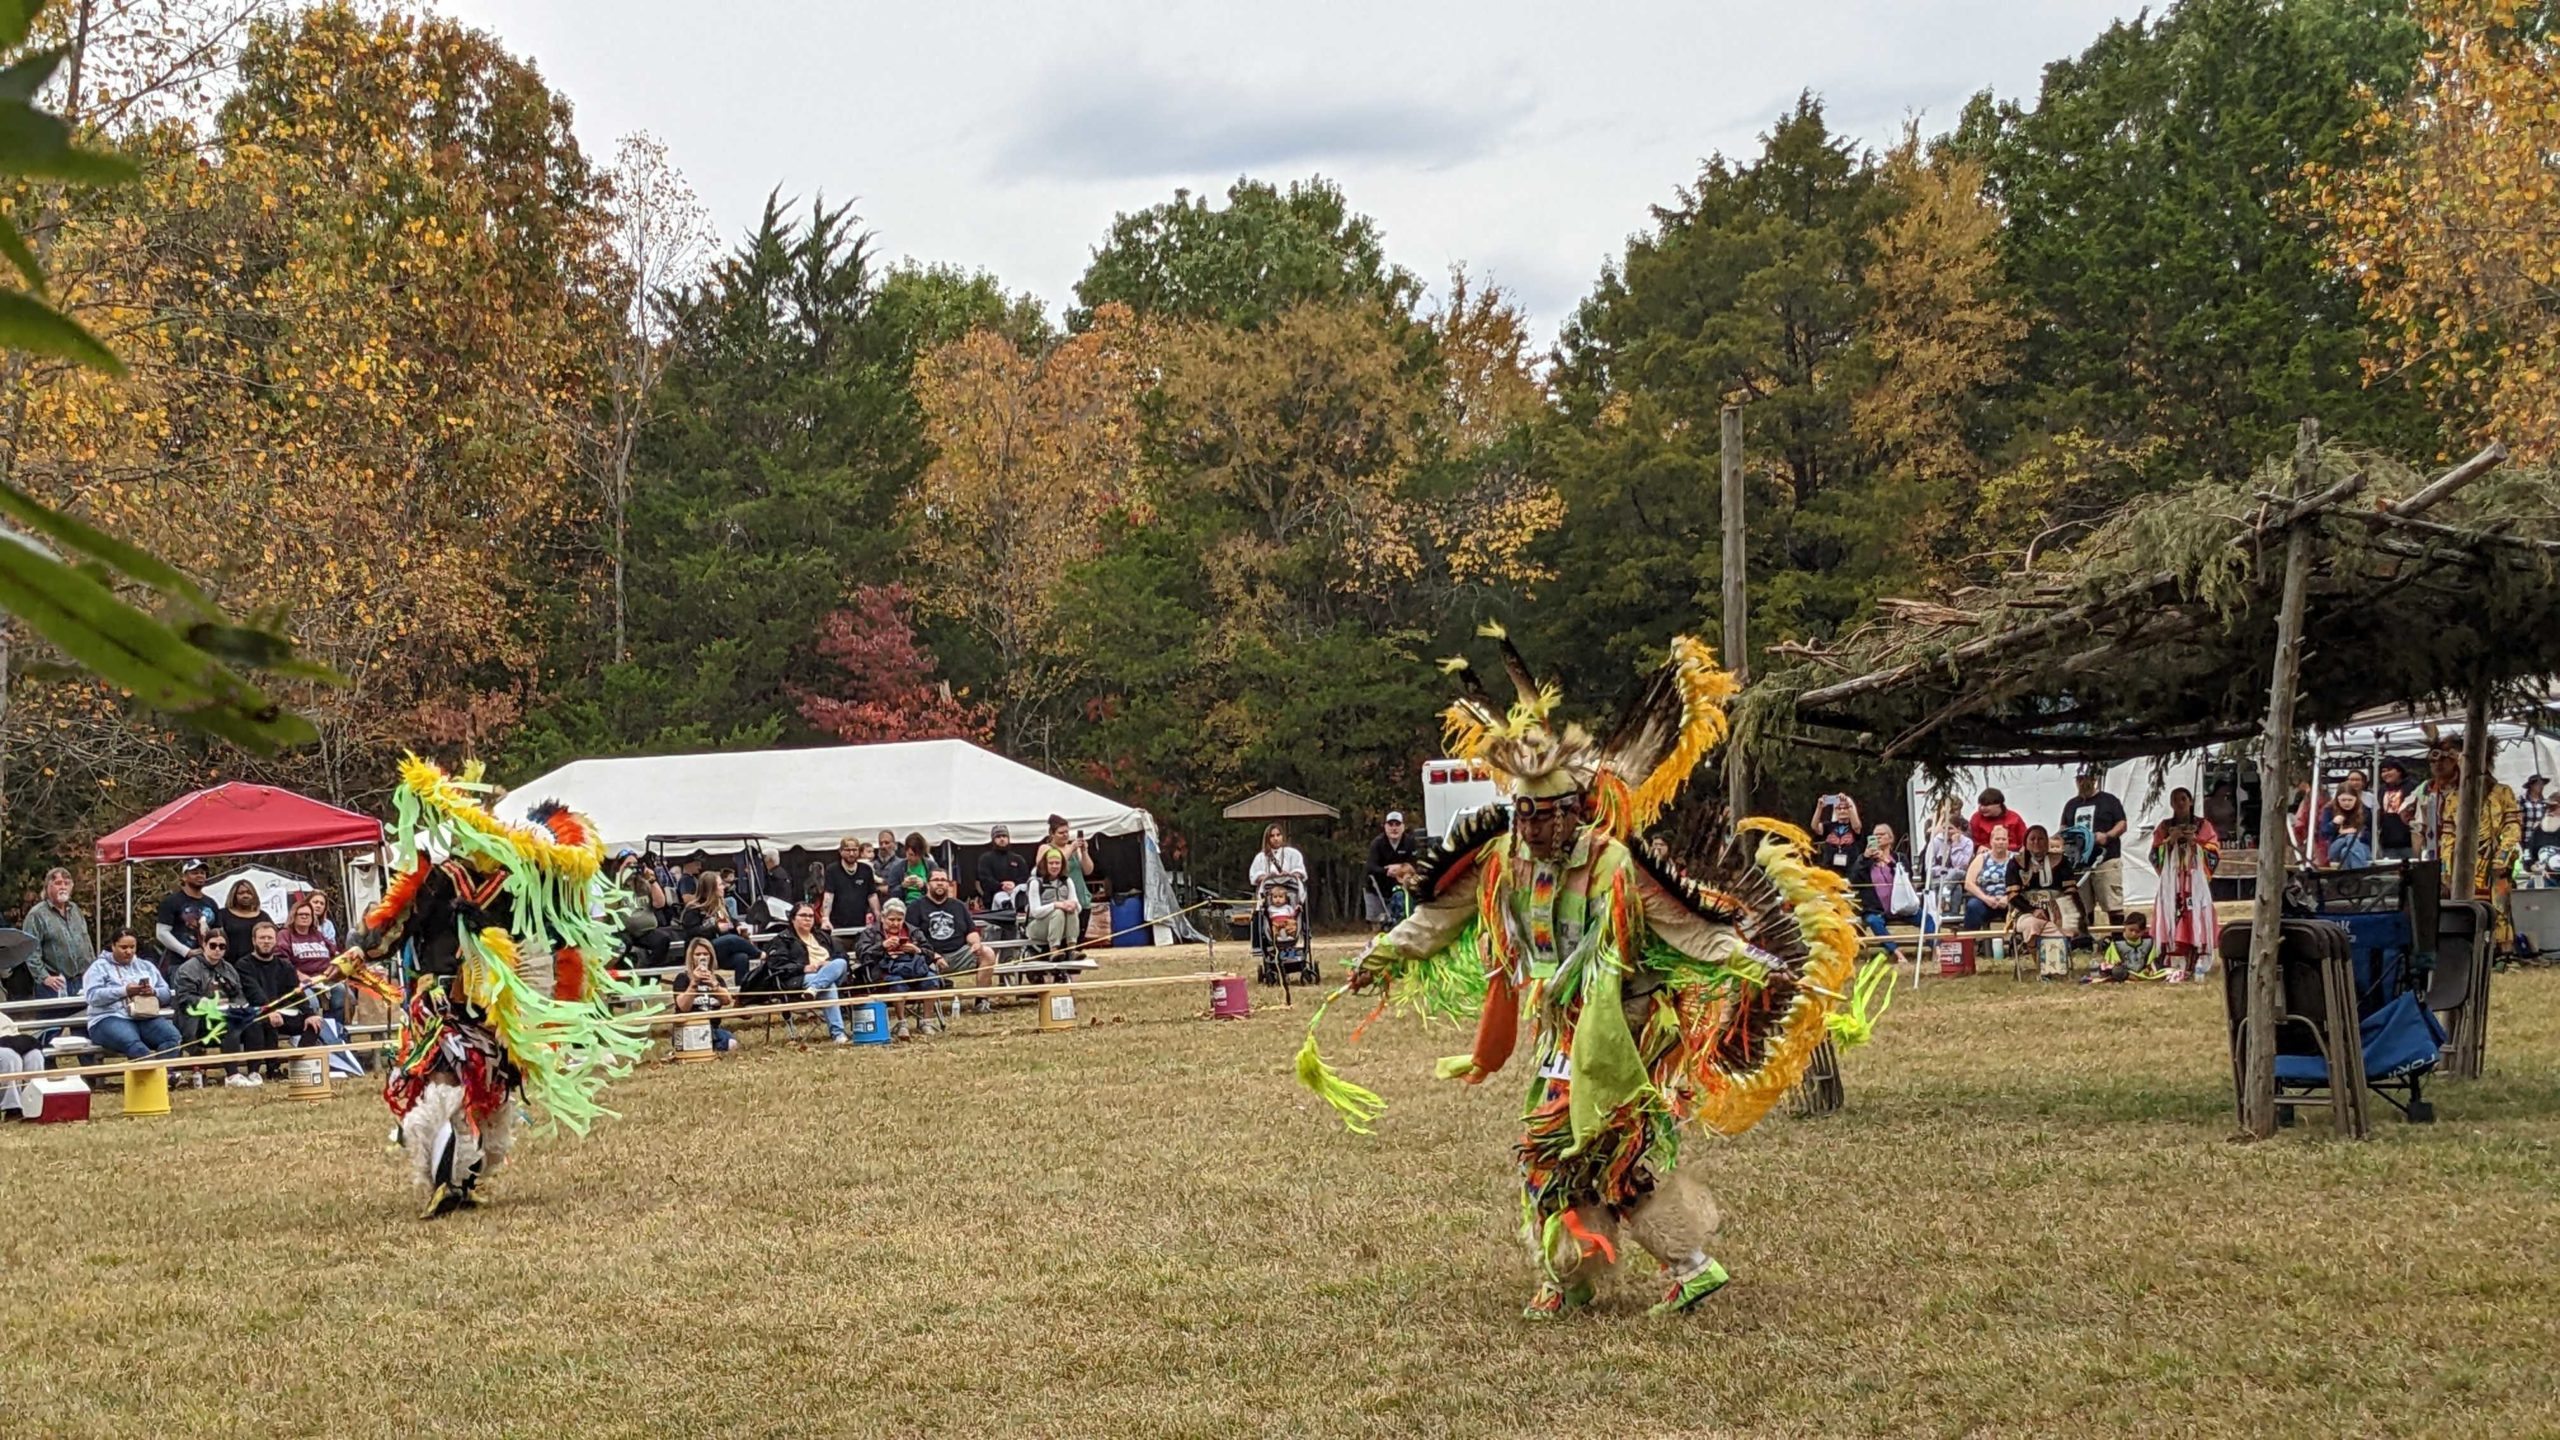 Pow wow teaches about Native American cultures and raises money to